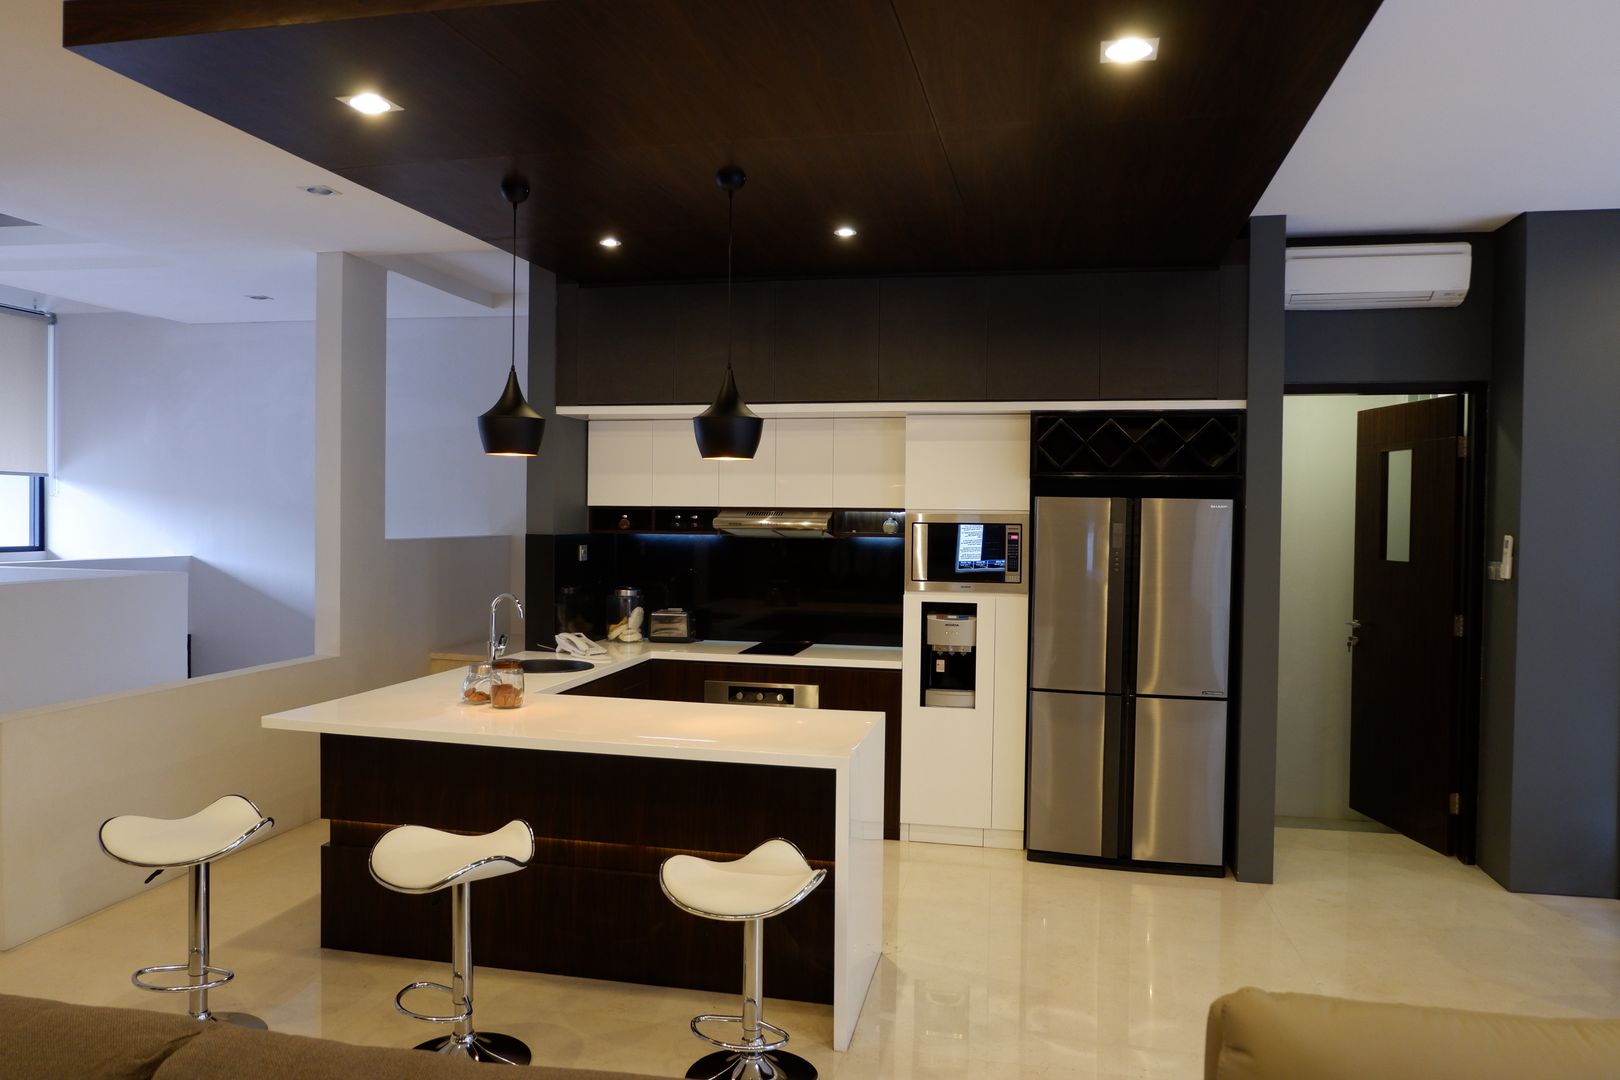 Modern Masculine house, Exxo interior Exxo interior Built-in kitchens Plywood